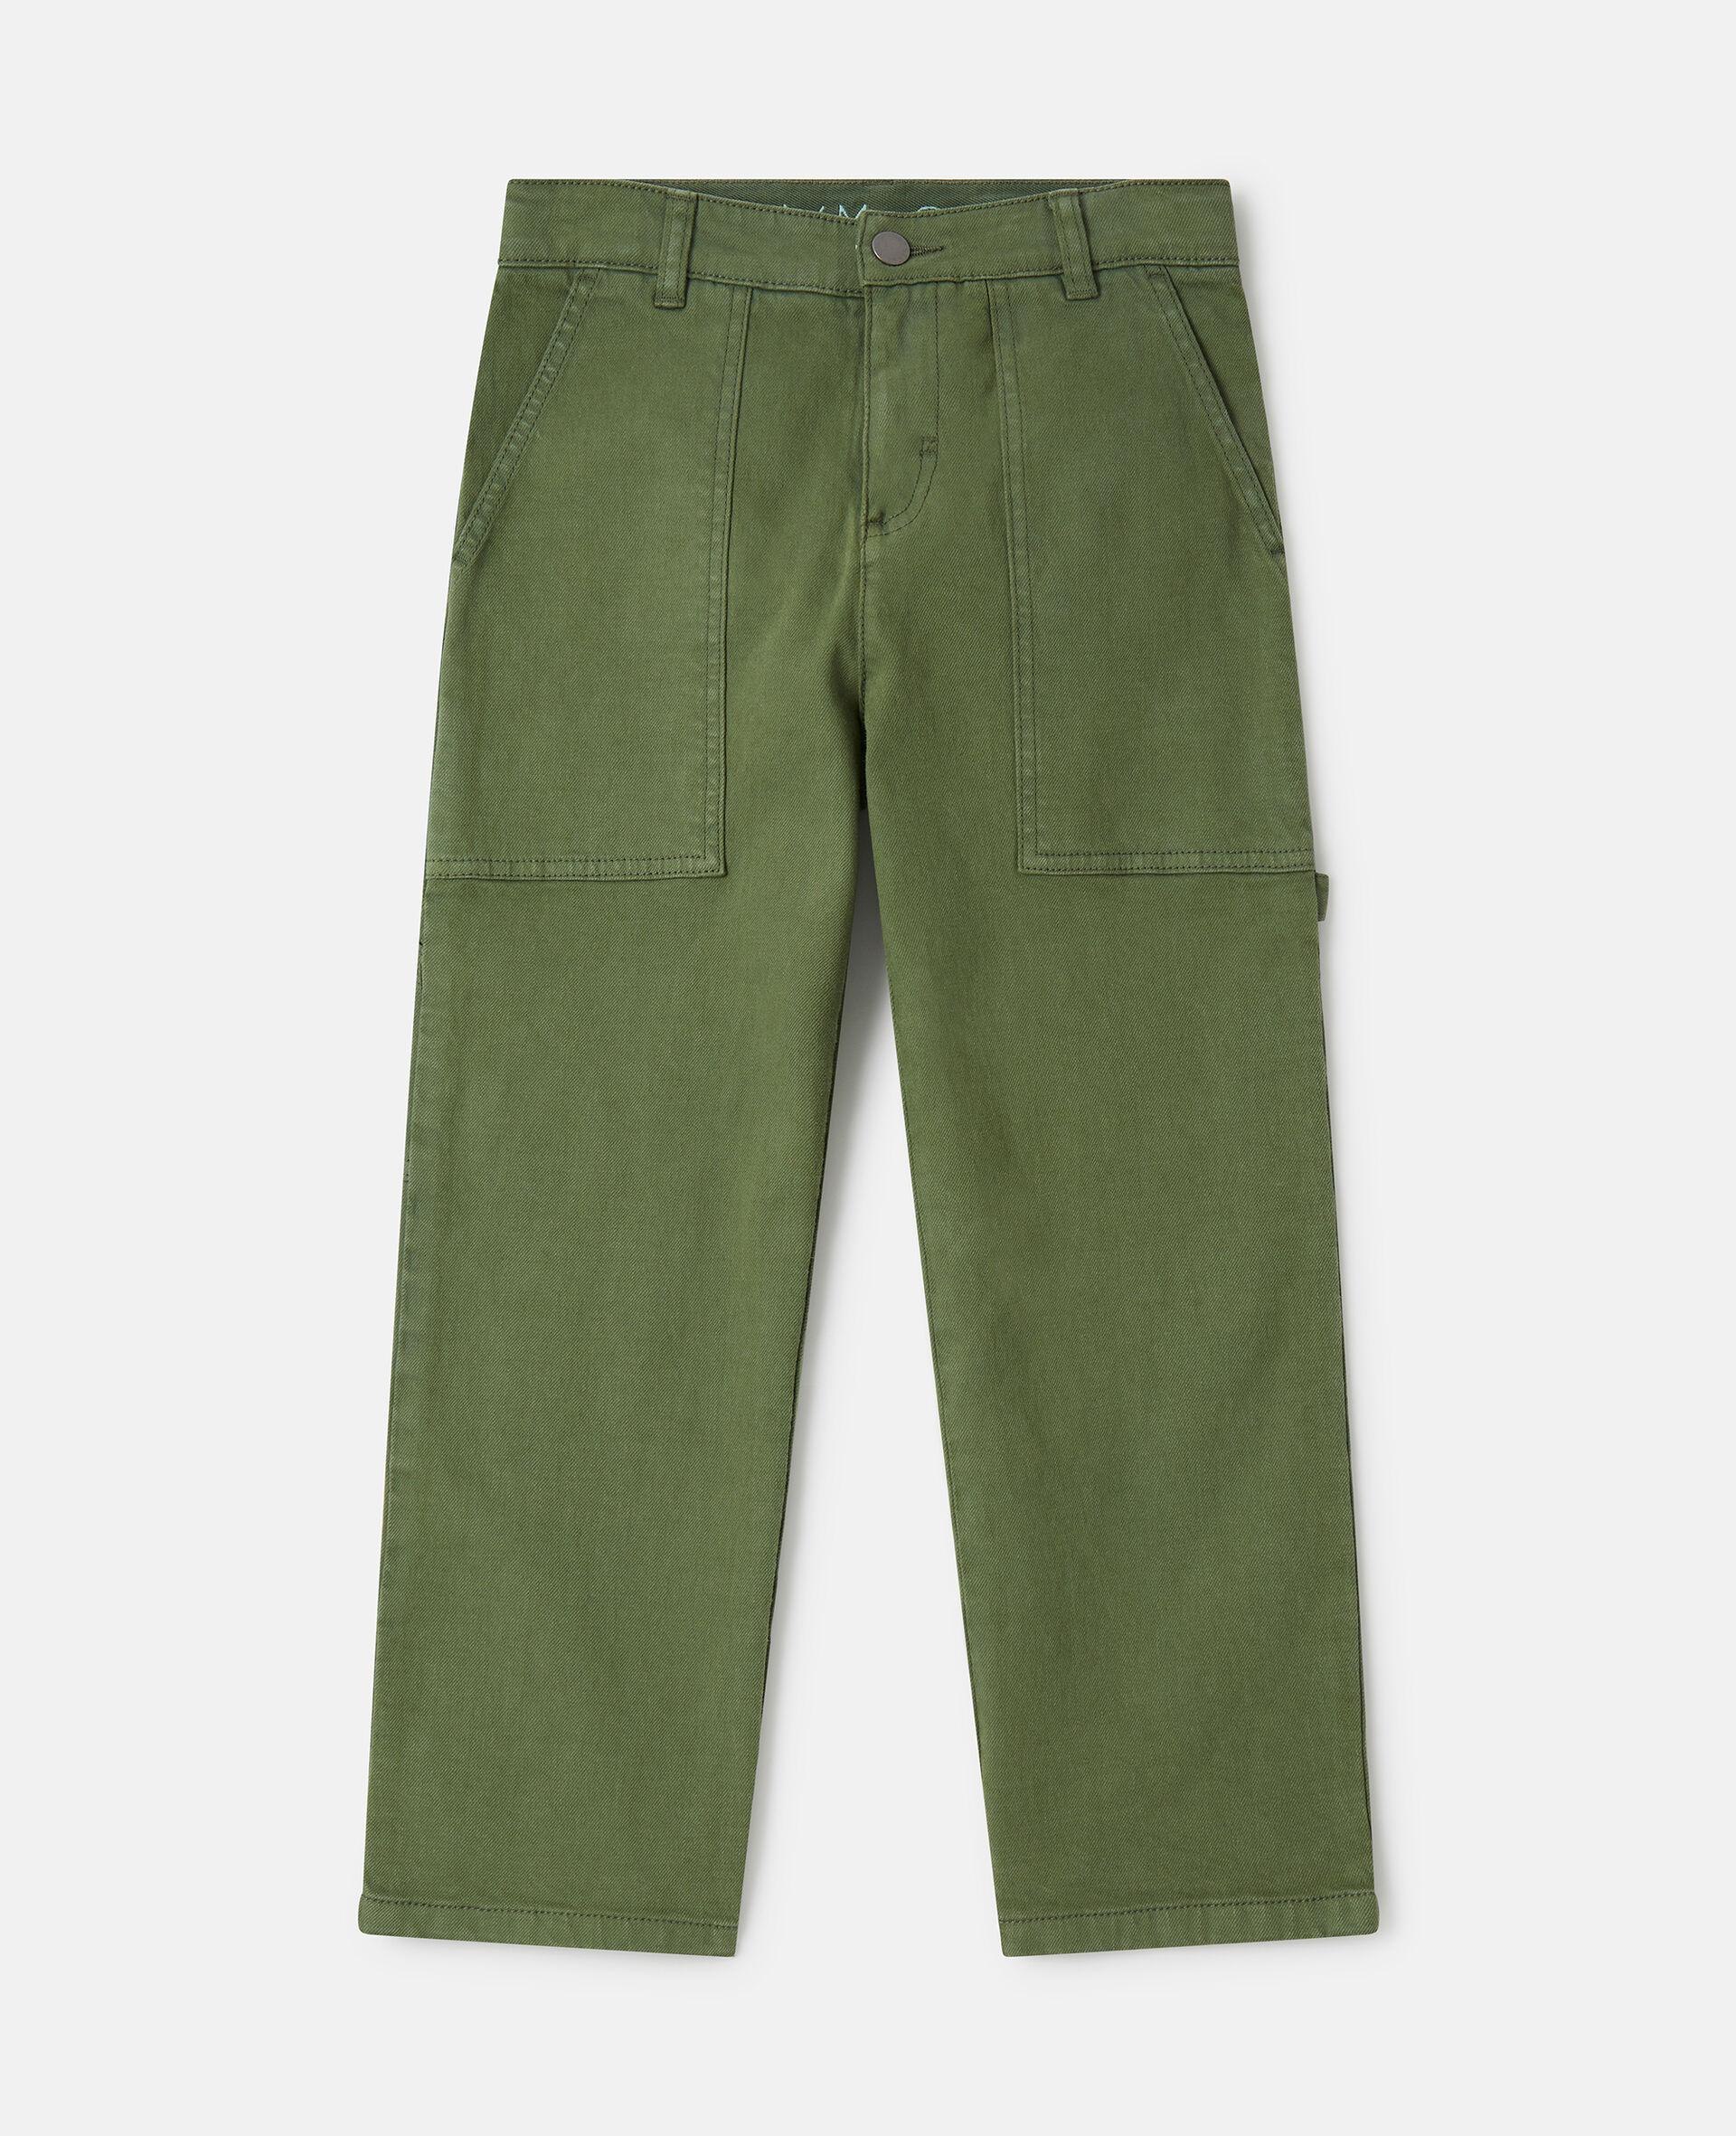 Patch Pocket Trousers-Green-model